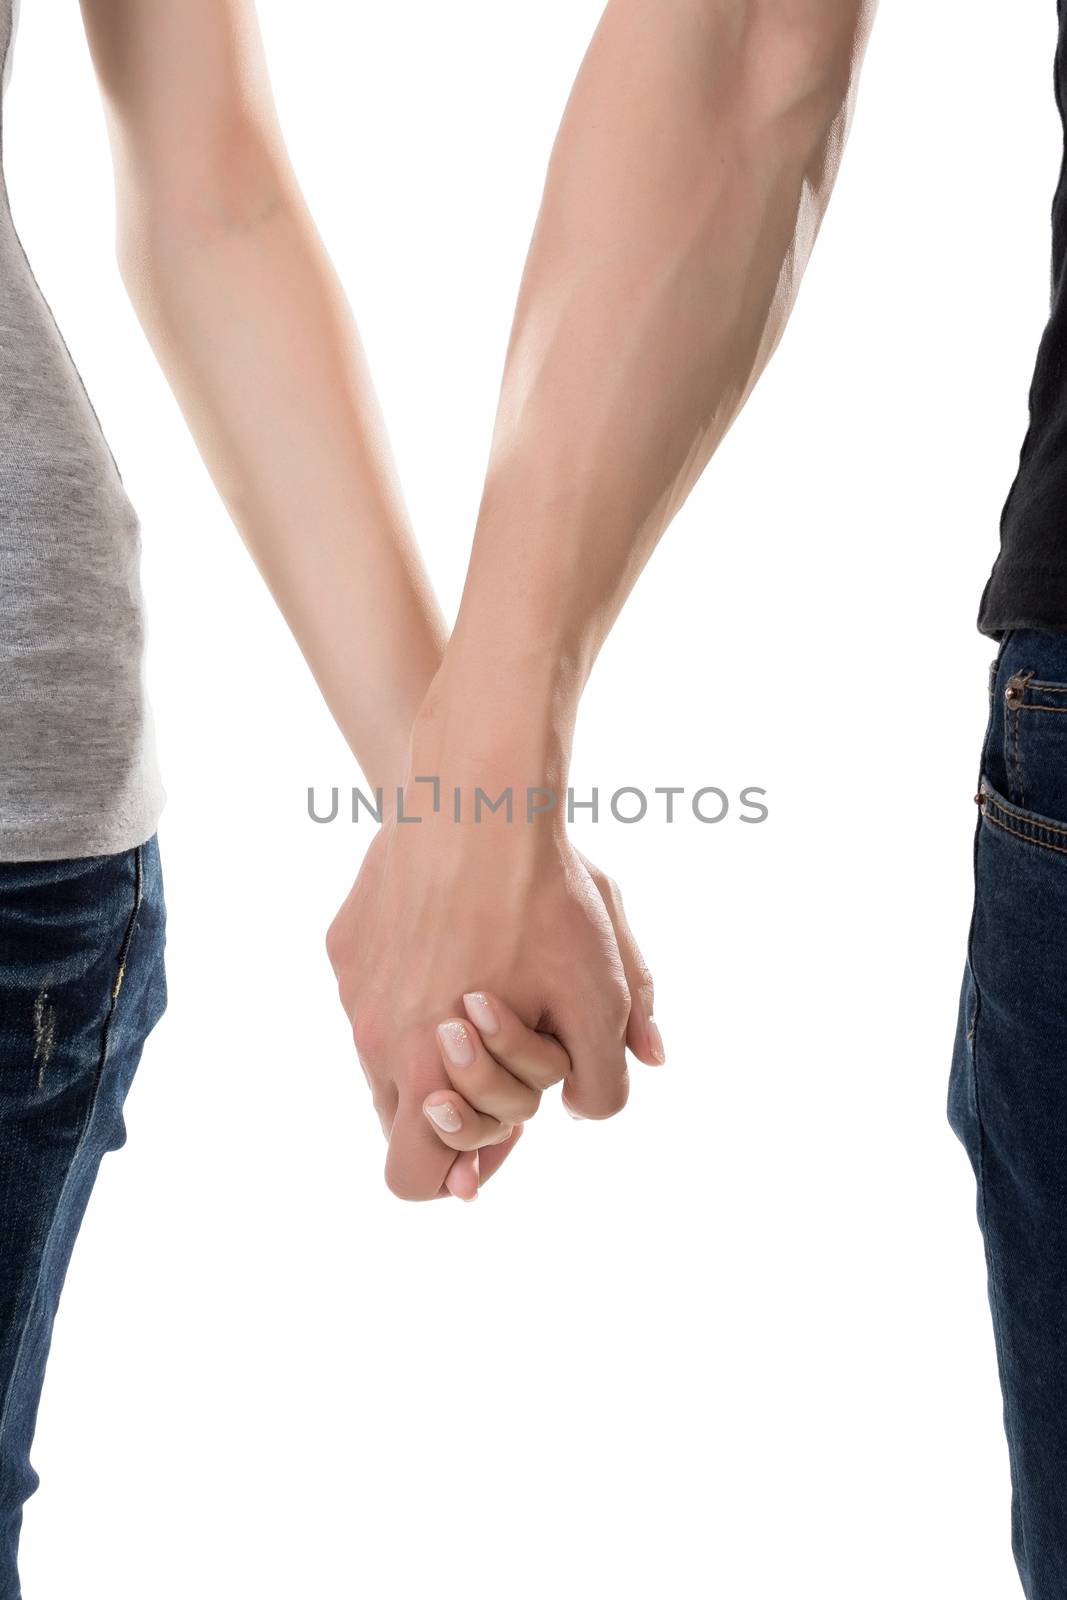 Man and woman holding hands, closeup image.